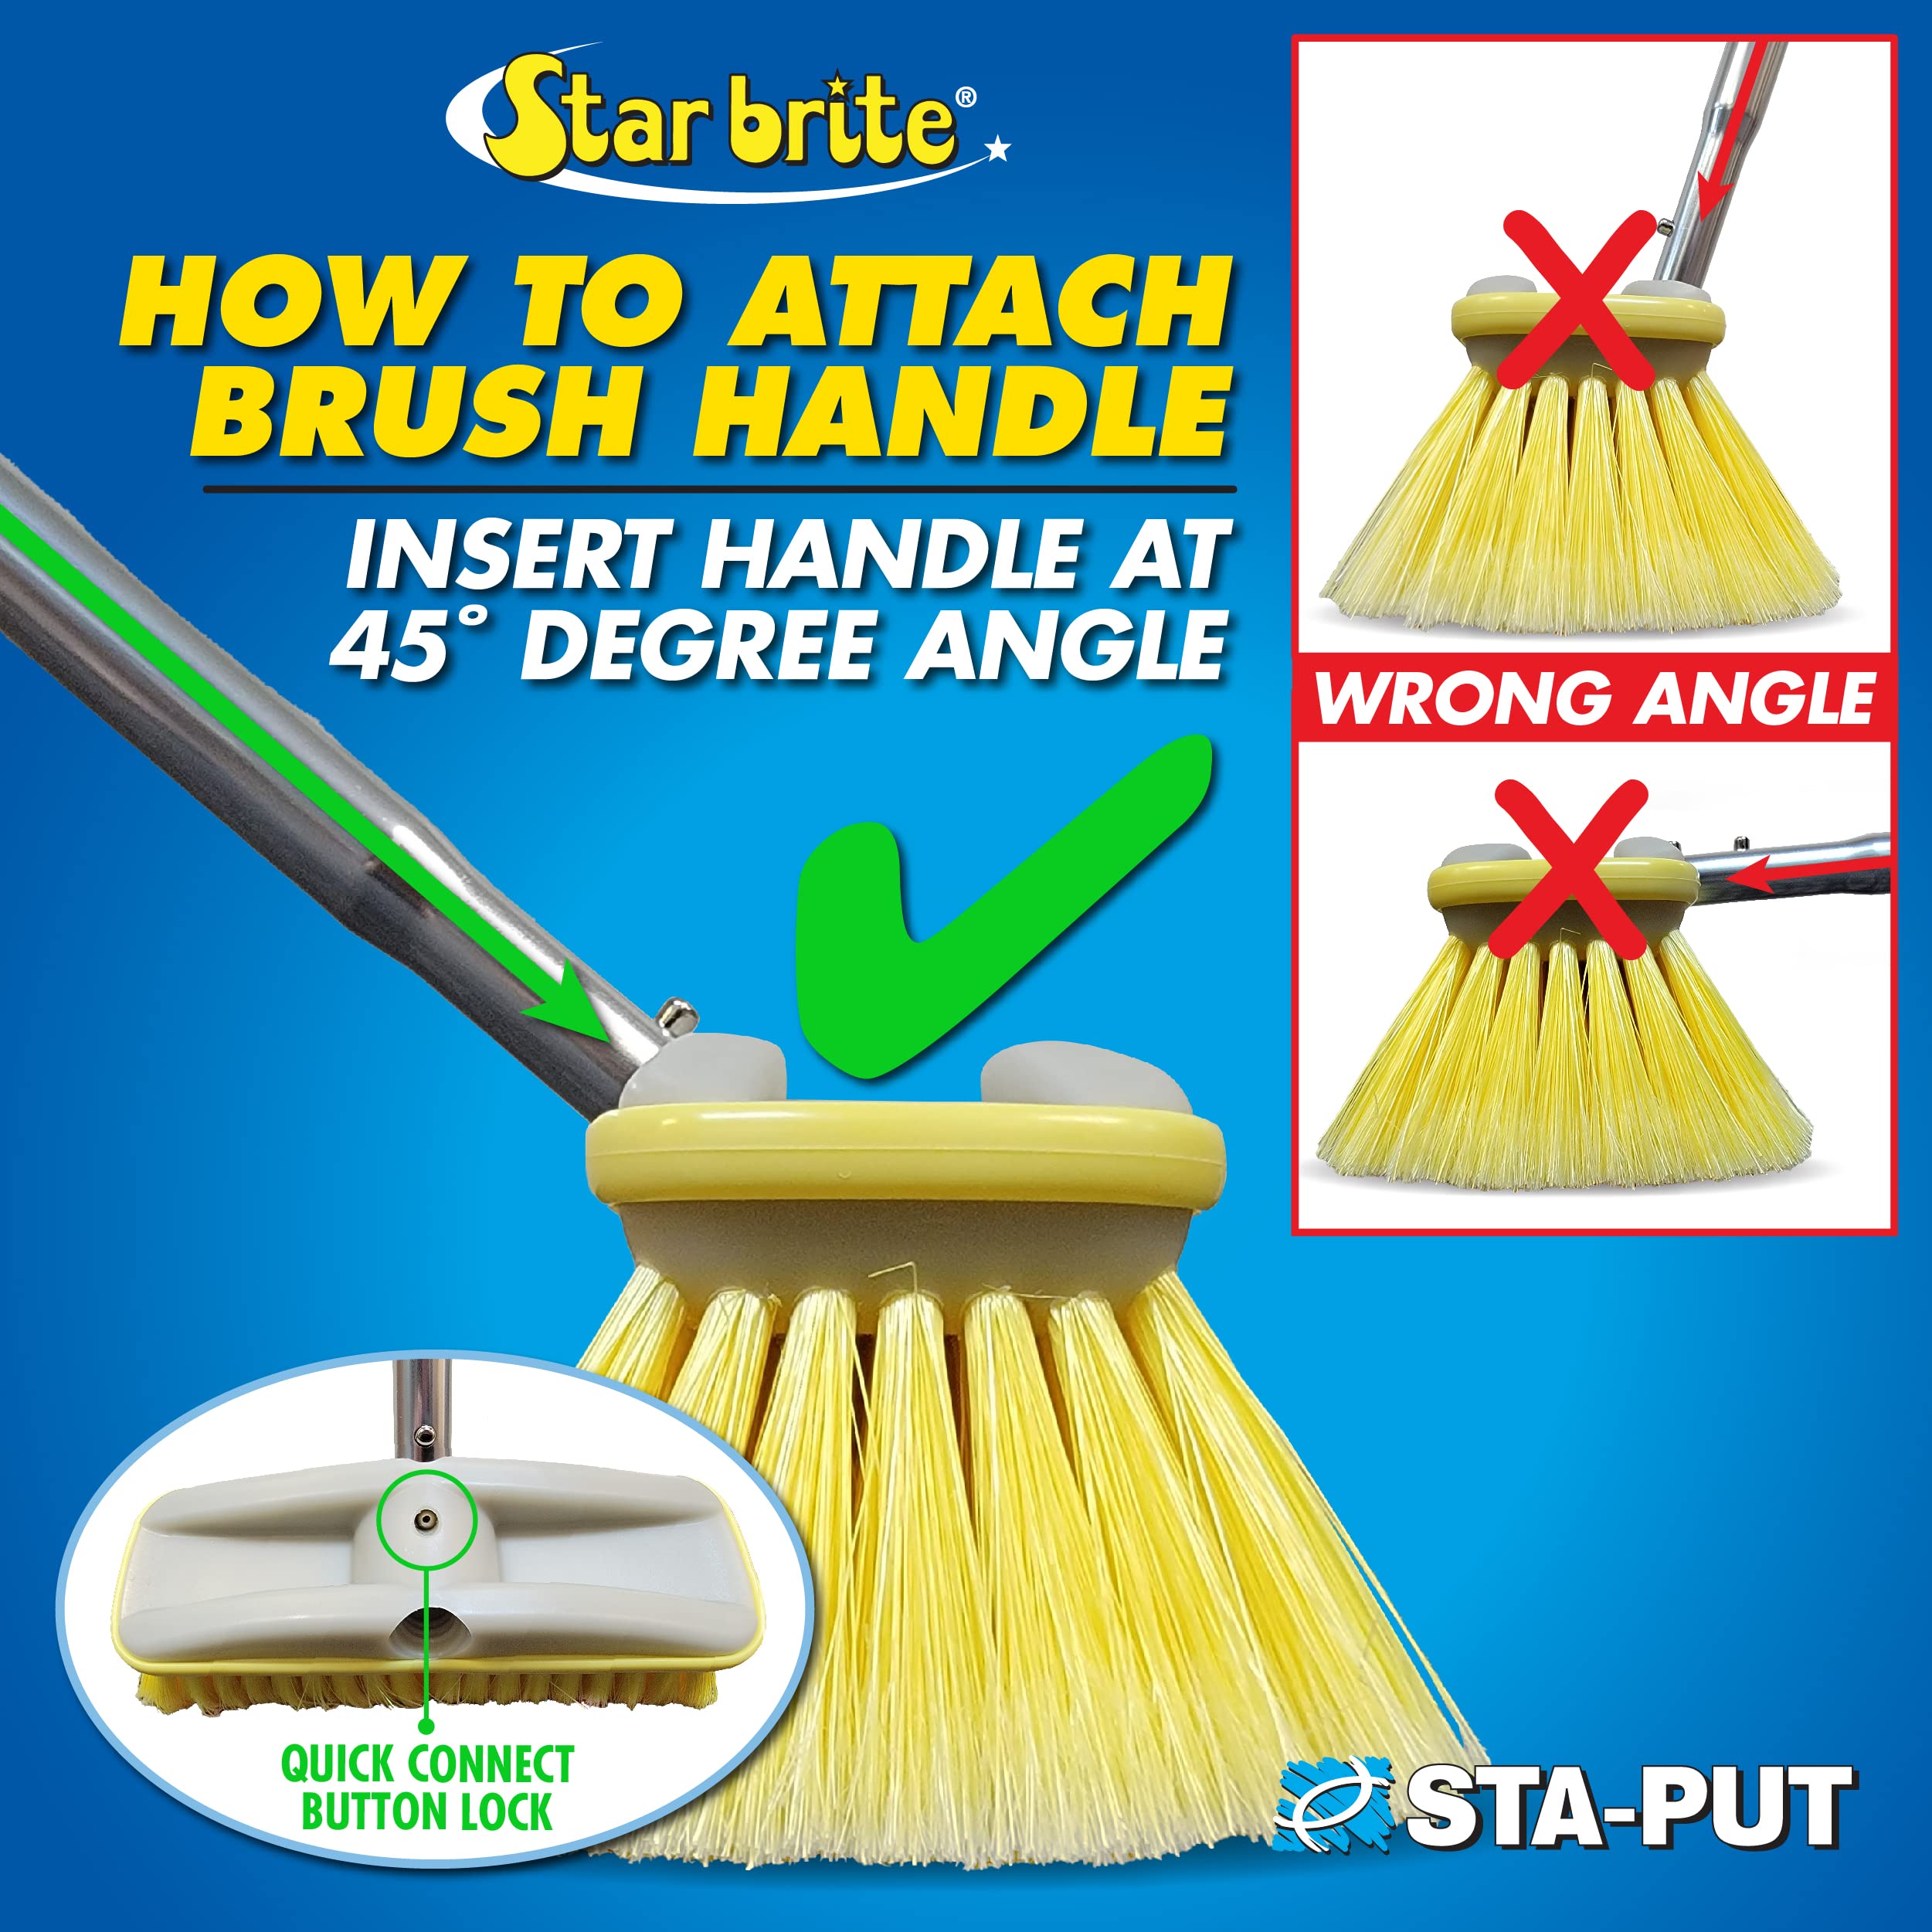 STAR BRITE Deluxe Telescoping Deck Brush Kit - Extendable Aircraft-Grade Aluminum Handle, Soft or Medium Bristles, Floats if Dropped, Ergonomic Design, Multi-Surface Cleaning